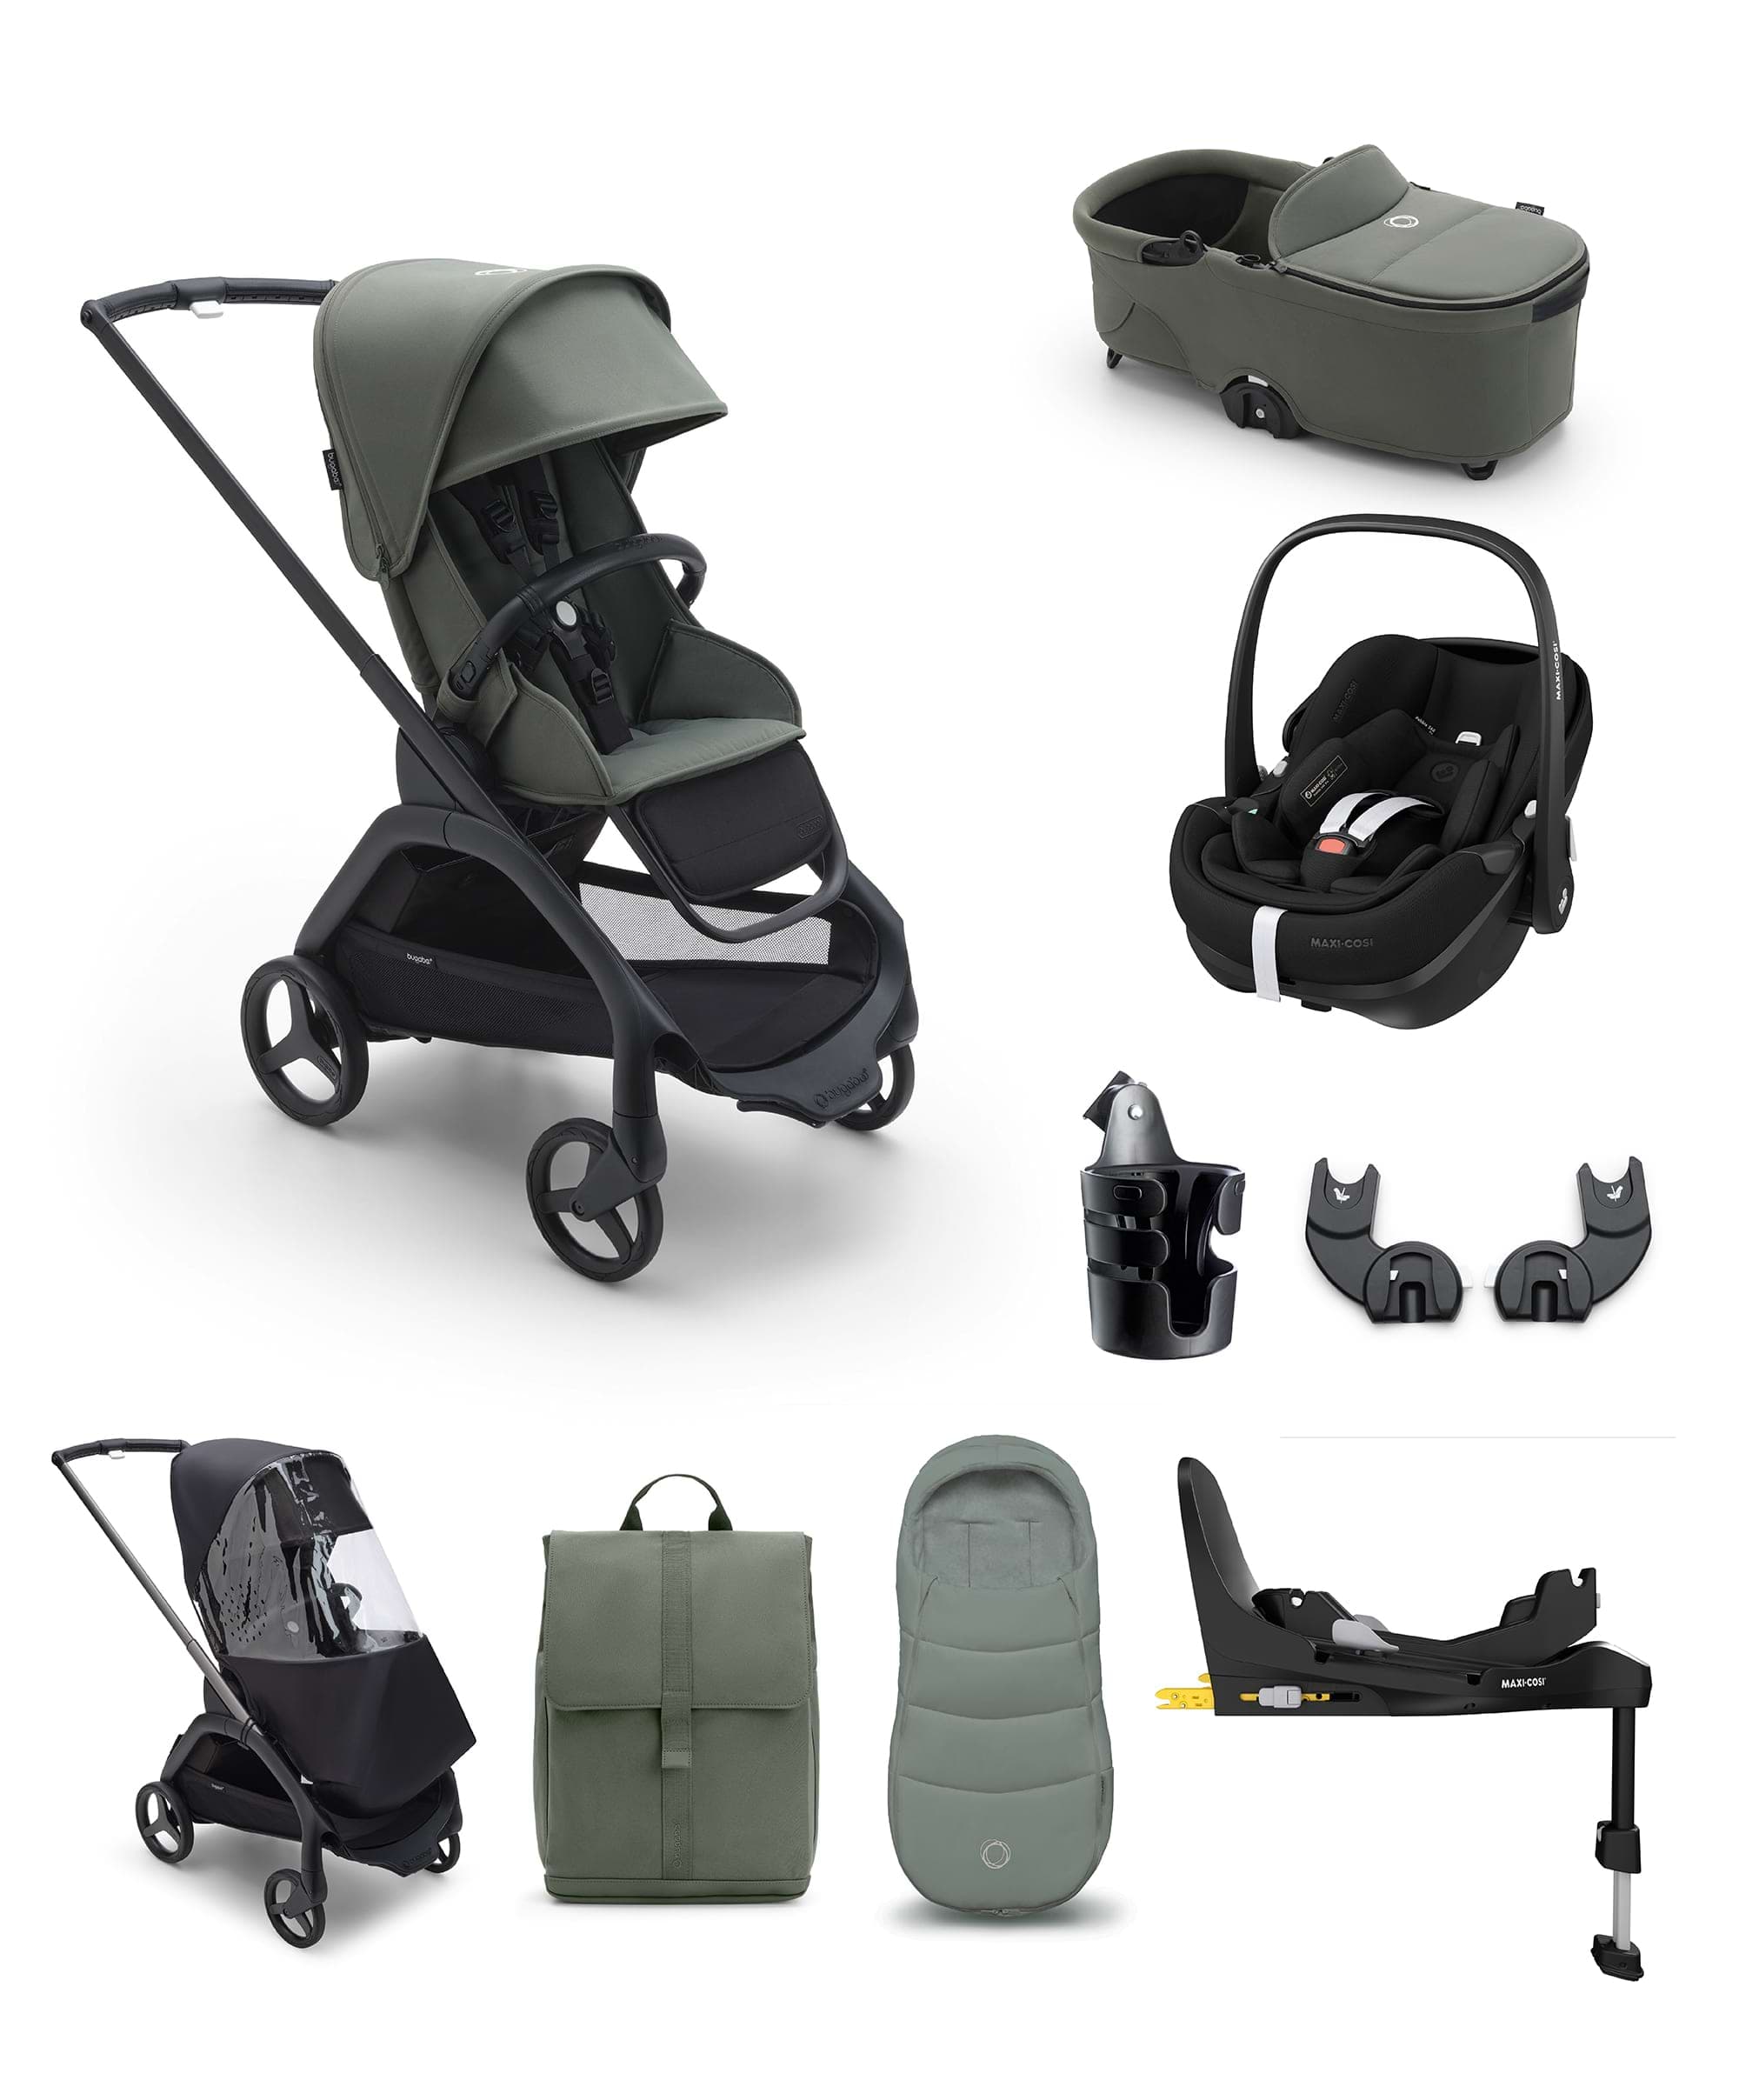 Bugaboo Dragonfly Ultimate 9 Piece Bundle with Maxi Cosi Pebble Pro 360 Car Seat and Base in Black a